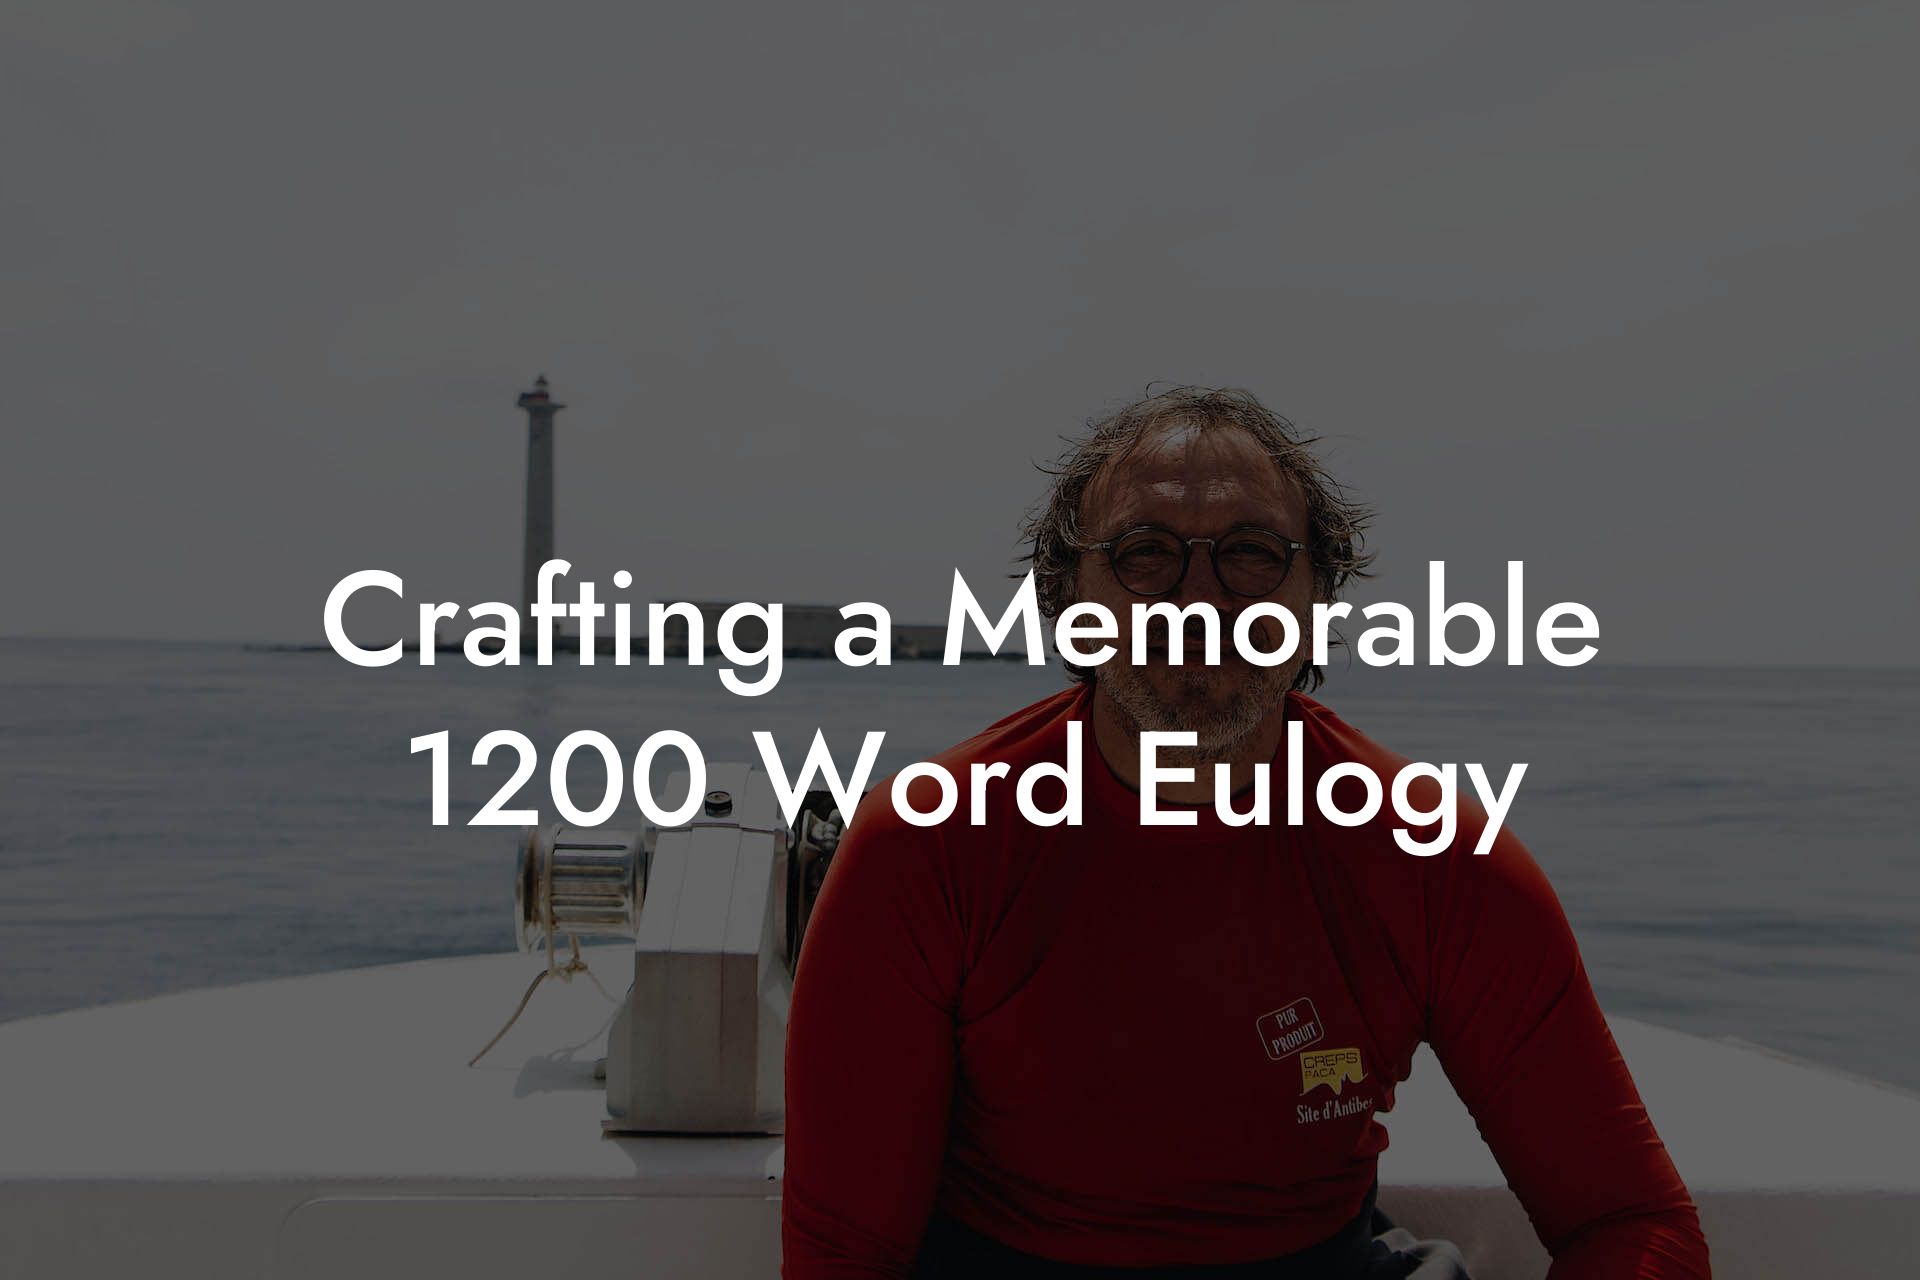 Crafting a Memorable 1200 Word Eulogy